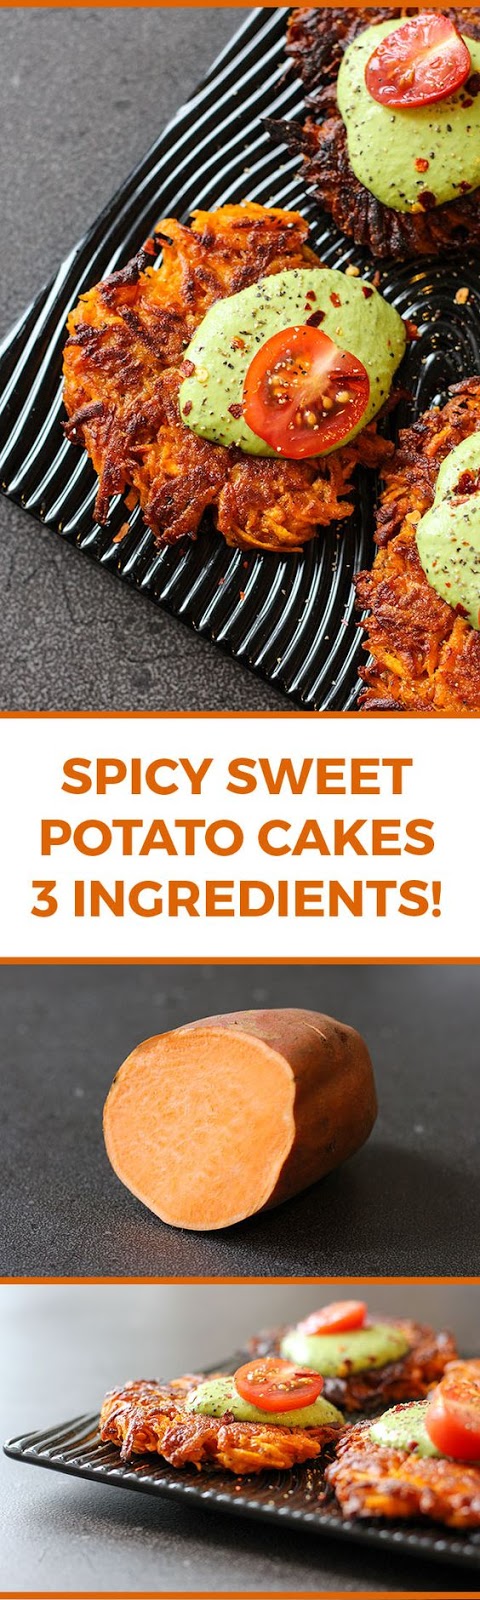 Three ingredients, ten minutes! These spicy little sweet potato cakes will make you smile.